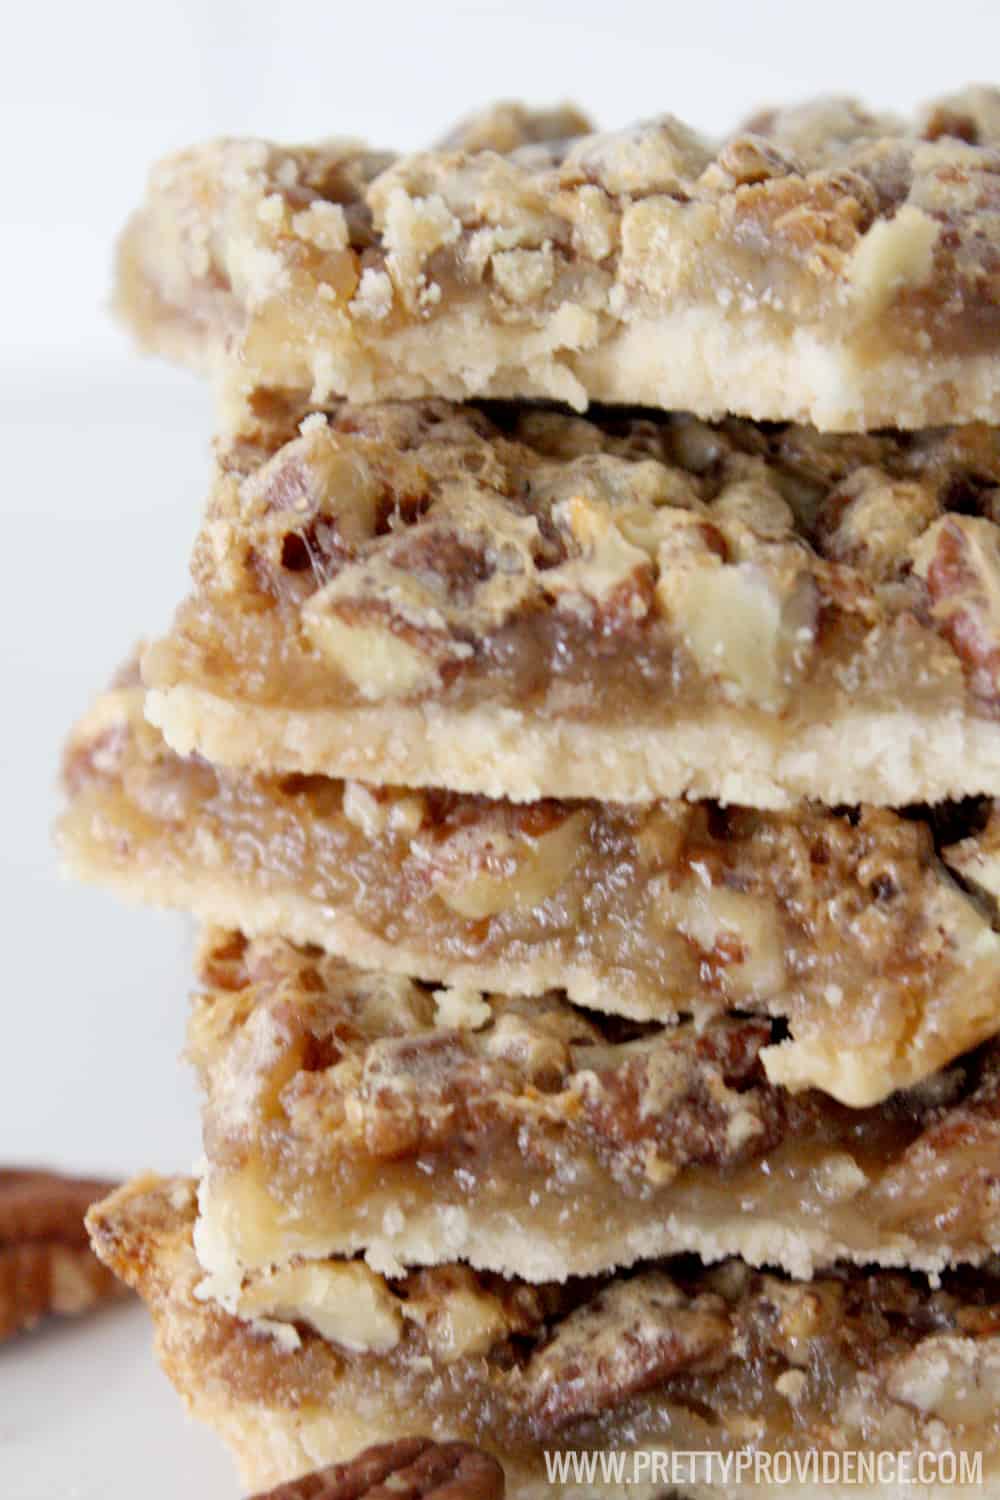 Okay these Pecan bars are AMAZING!! Way better/easier than pecan pie and makes a TON! 